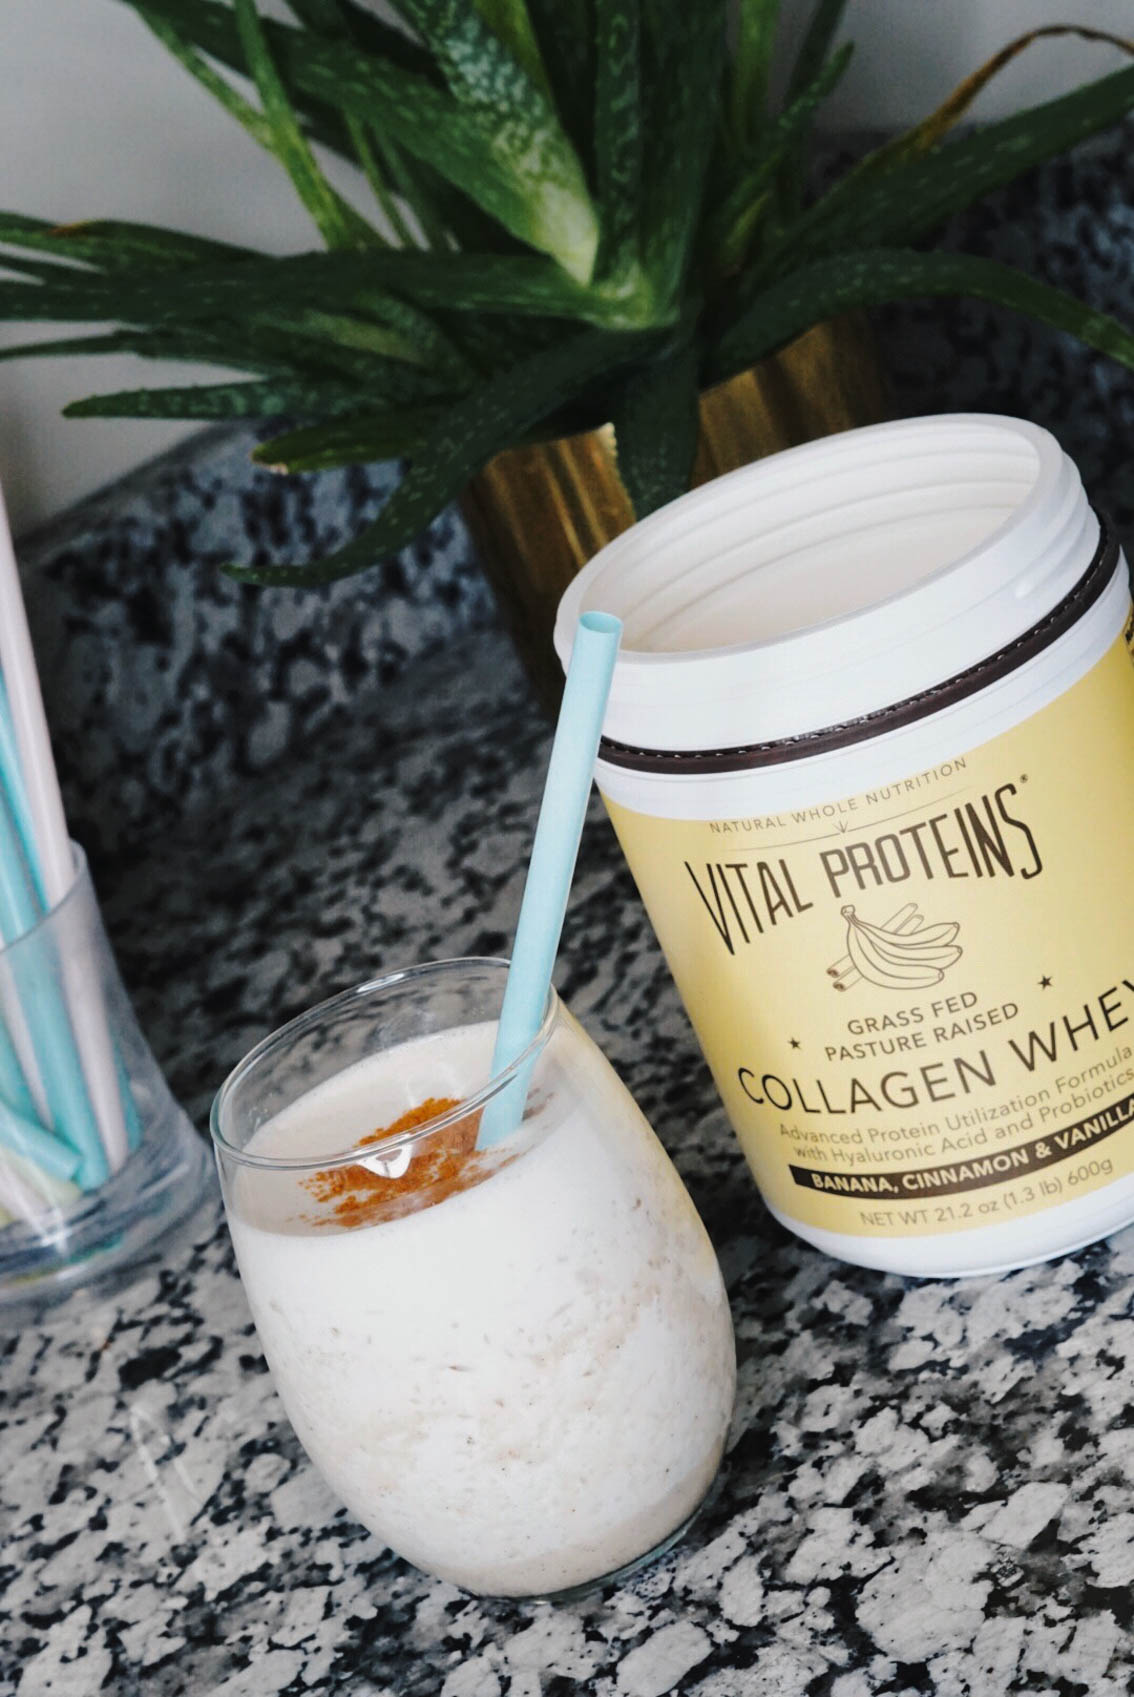 Jenna Boron of life and personal style blog, Balance and Chaos, shares her favorite Vital Proteins powder smoothie recipe which includes Banana, Cinnamon, & Vanilla Collagen Whey - Protein Formula with Hyaluronic Acid and Probiotics